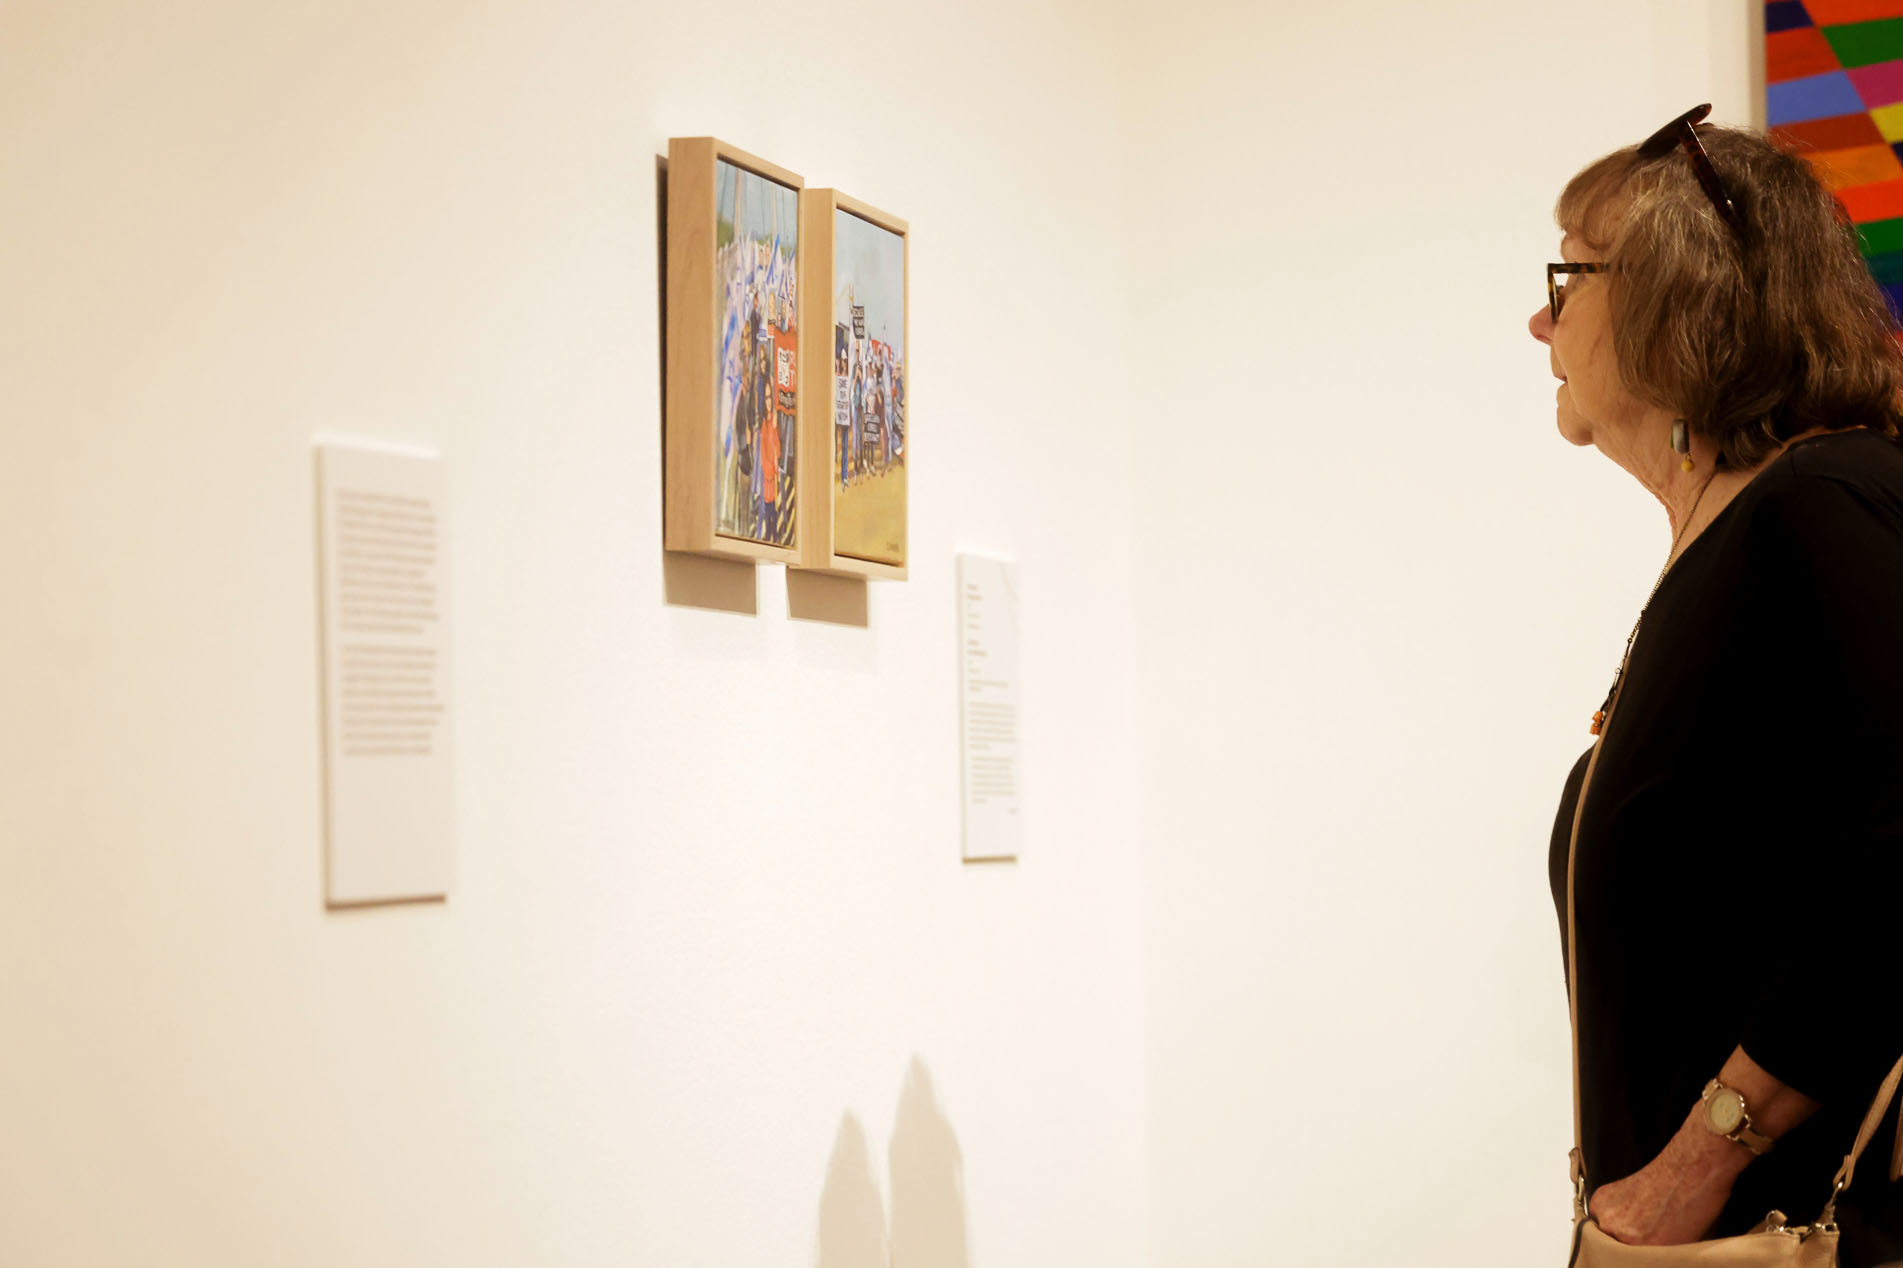 A woman with glasses and a handbag closely observes two small framed paintings in a gallery, with description placards on the wall beside them.